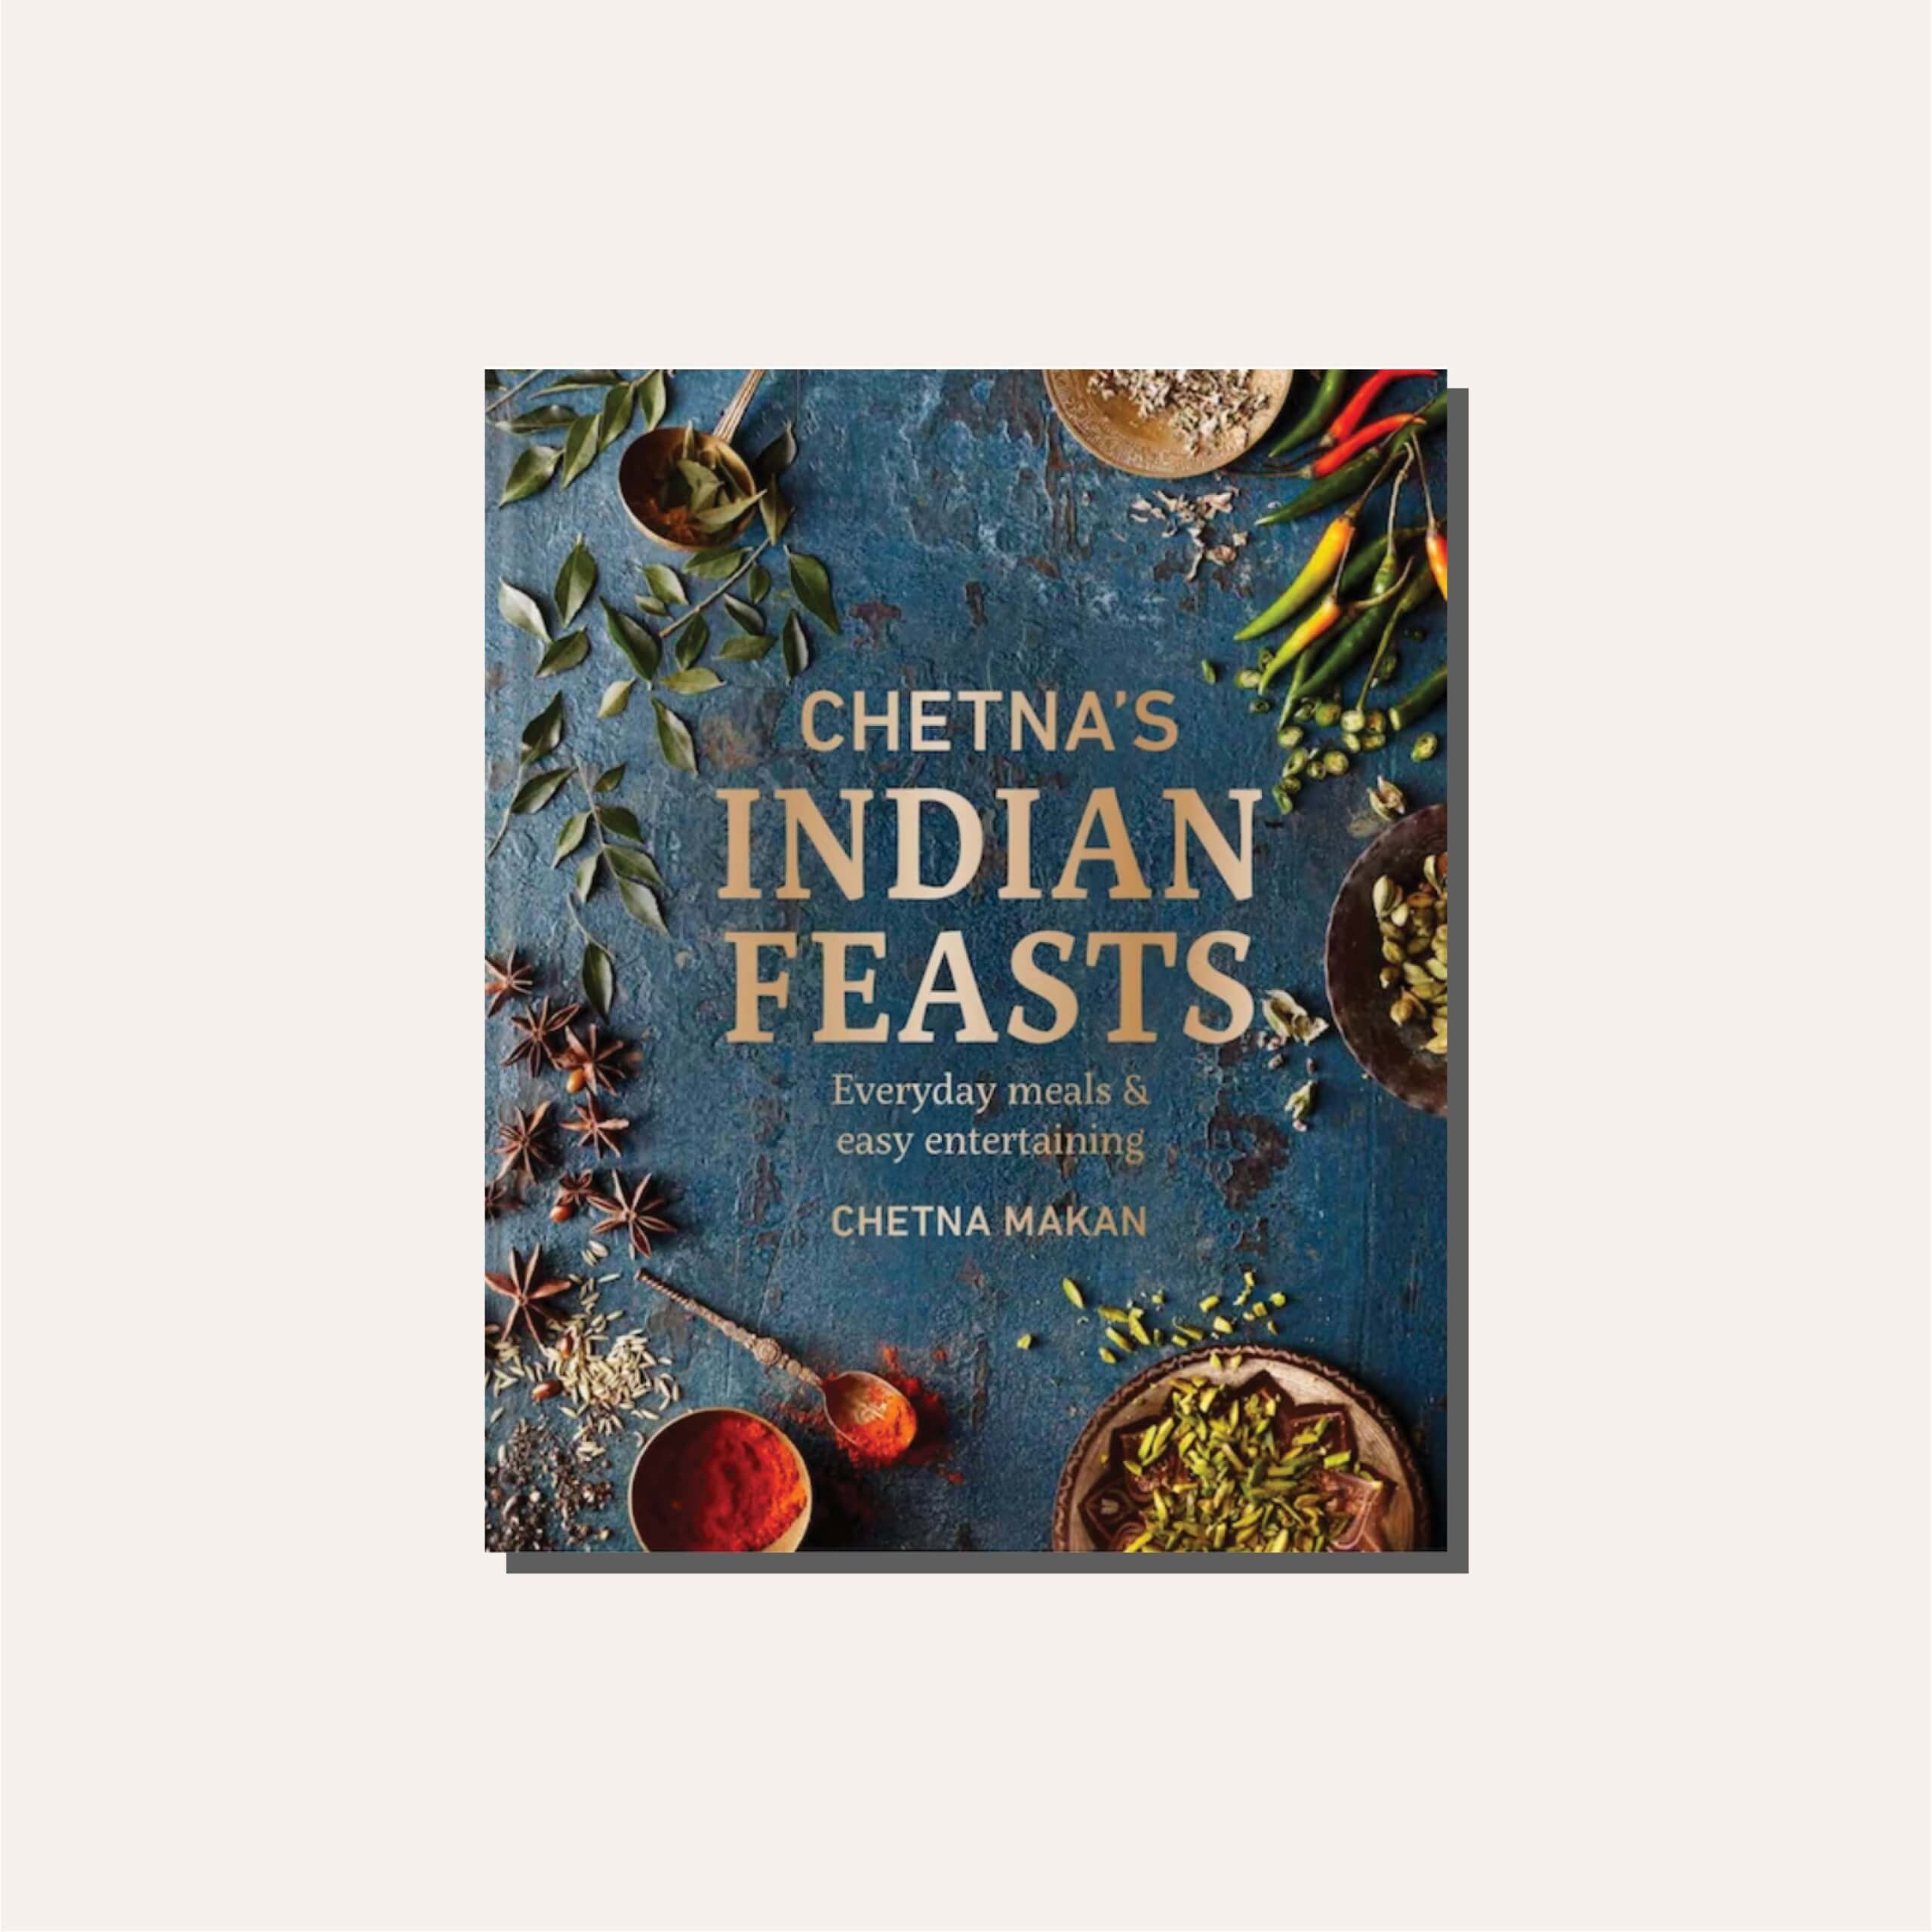 A teal blue cookbook titled "Chetna's Indian Feasts" in a light tan frame